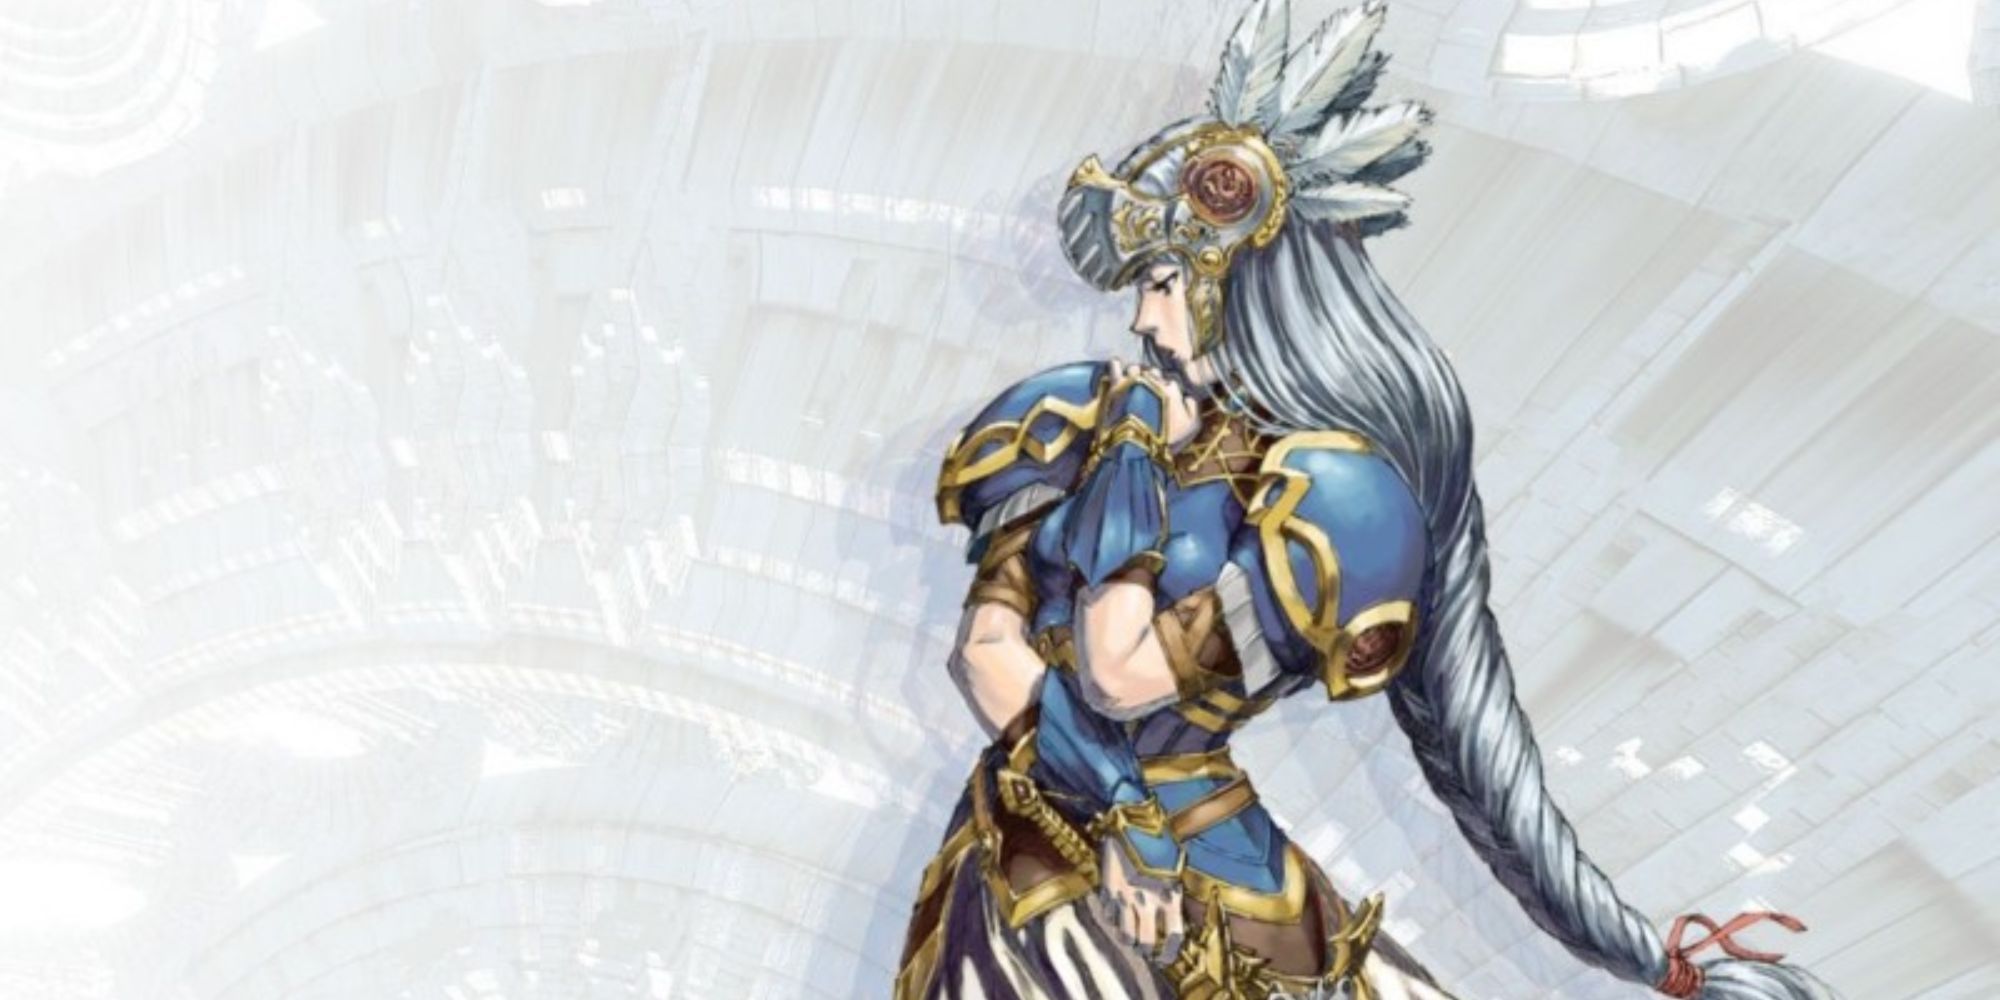 An illustration of Lenneth from Valkyrie Profile Lenneth